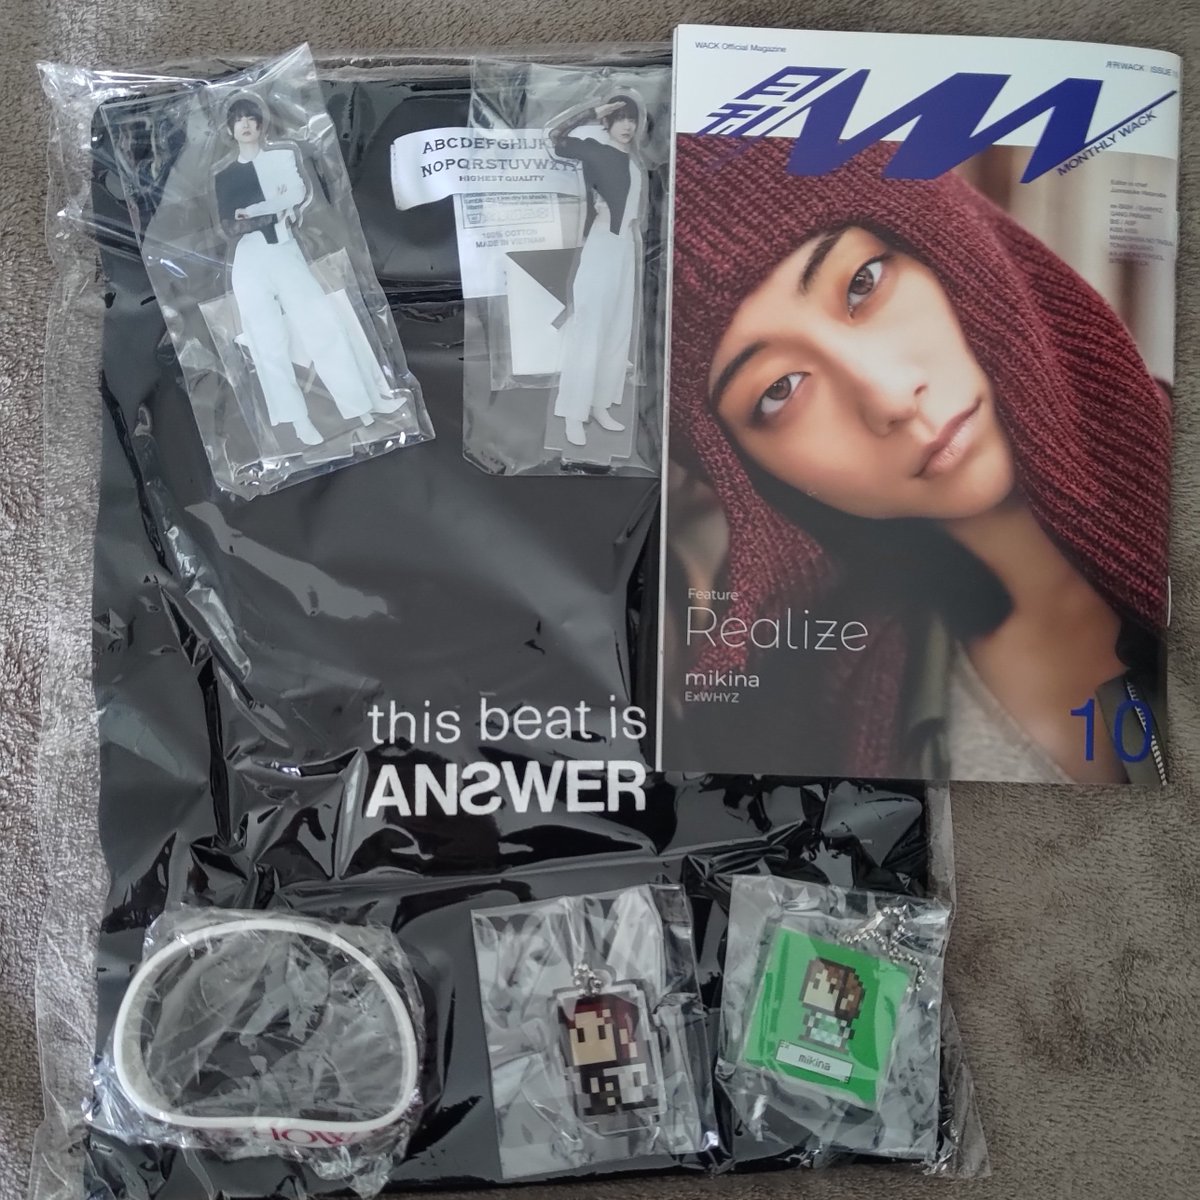 First merch intake from overseas in ages... 久しぶりの海外からの新グーヅ。 うれしい